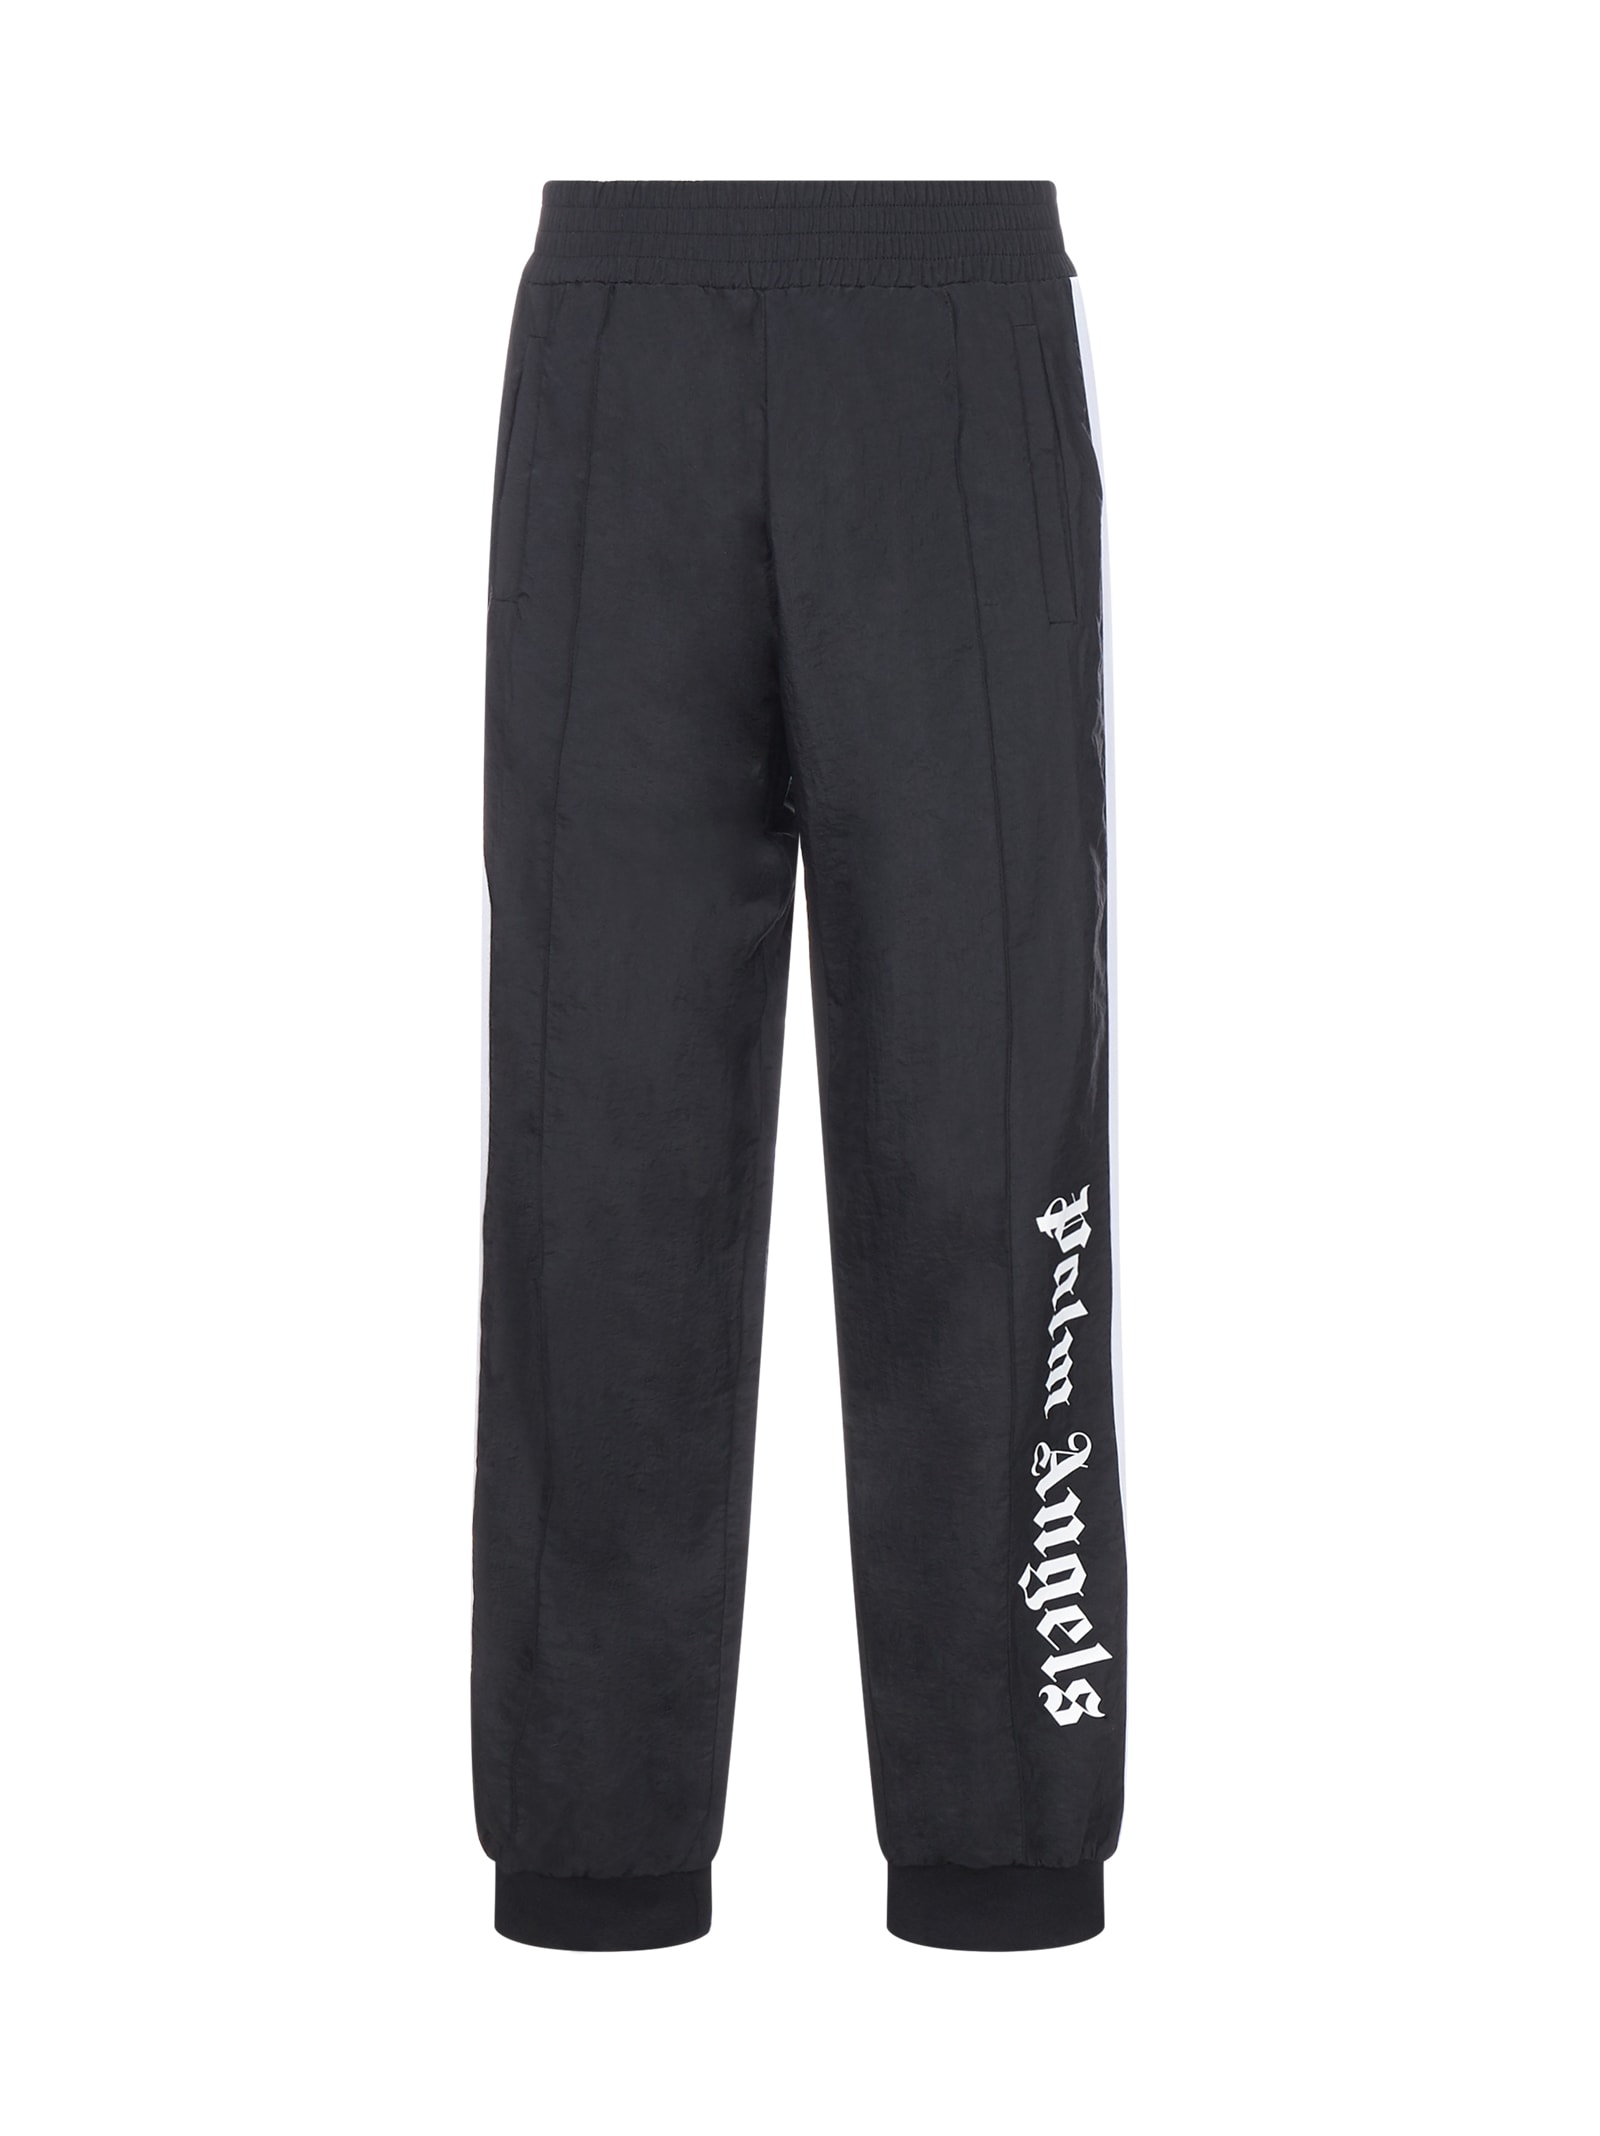 Palm Angels Palm Angels Trousers - Black white - 11001864 | italist